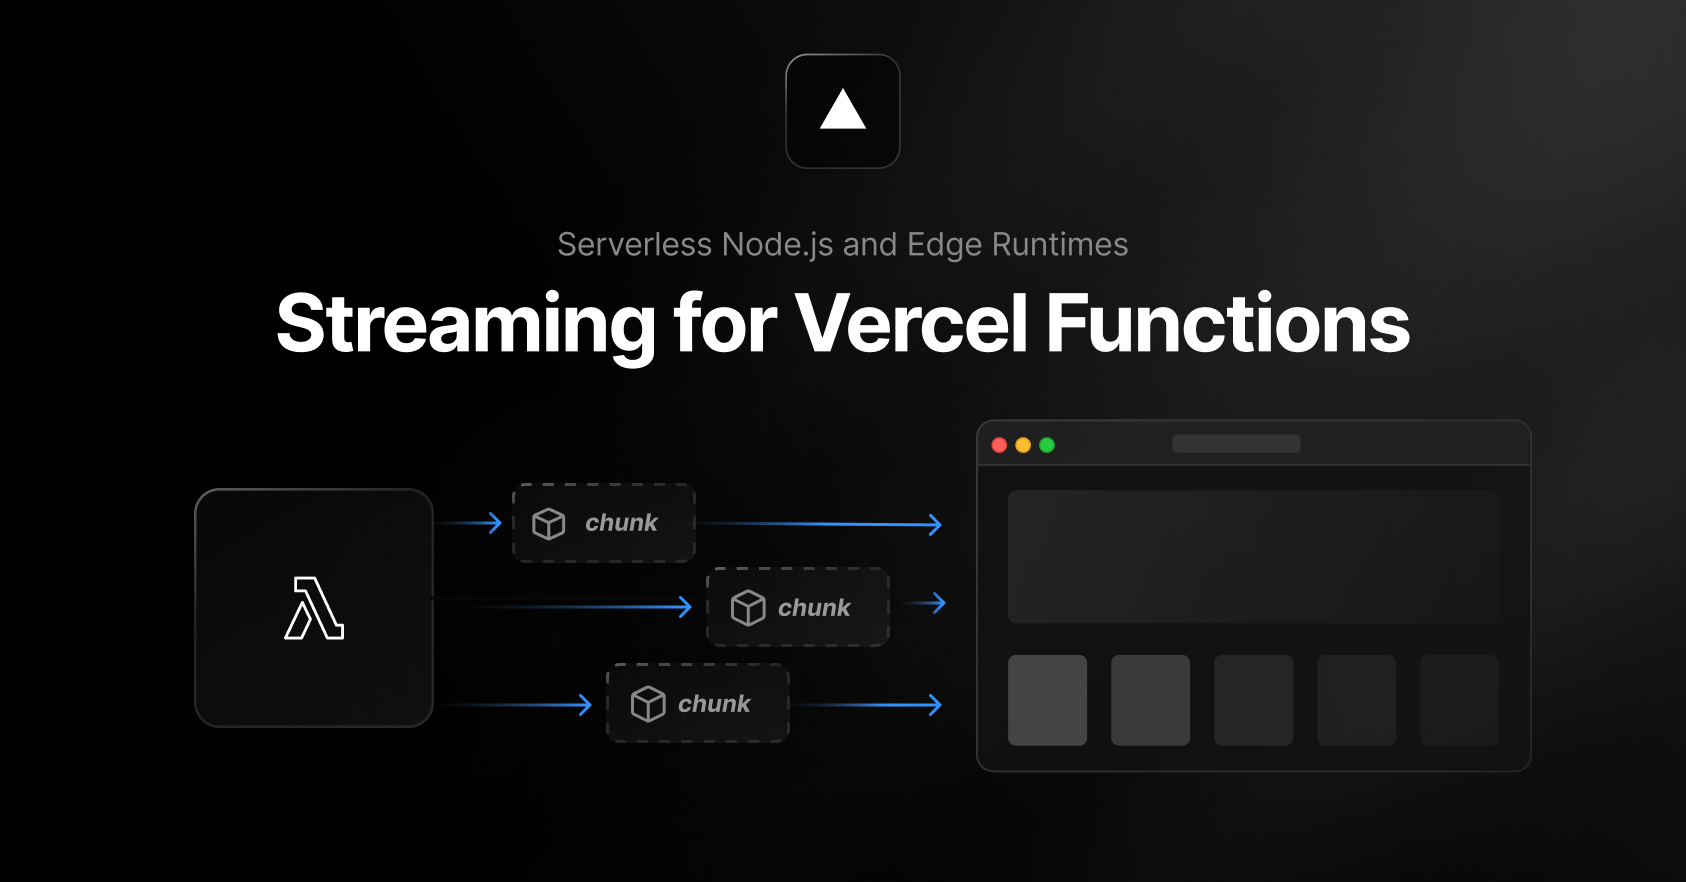 Streaming for Serverless Node.js and Edge Runtimes with Vercel Functions by Lydia Hallie